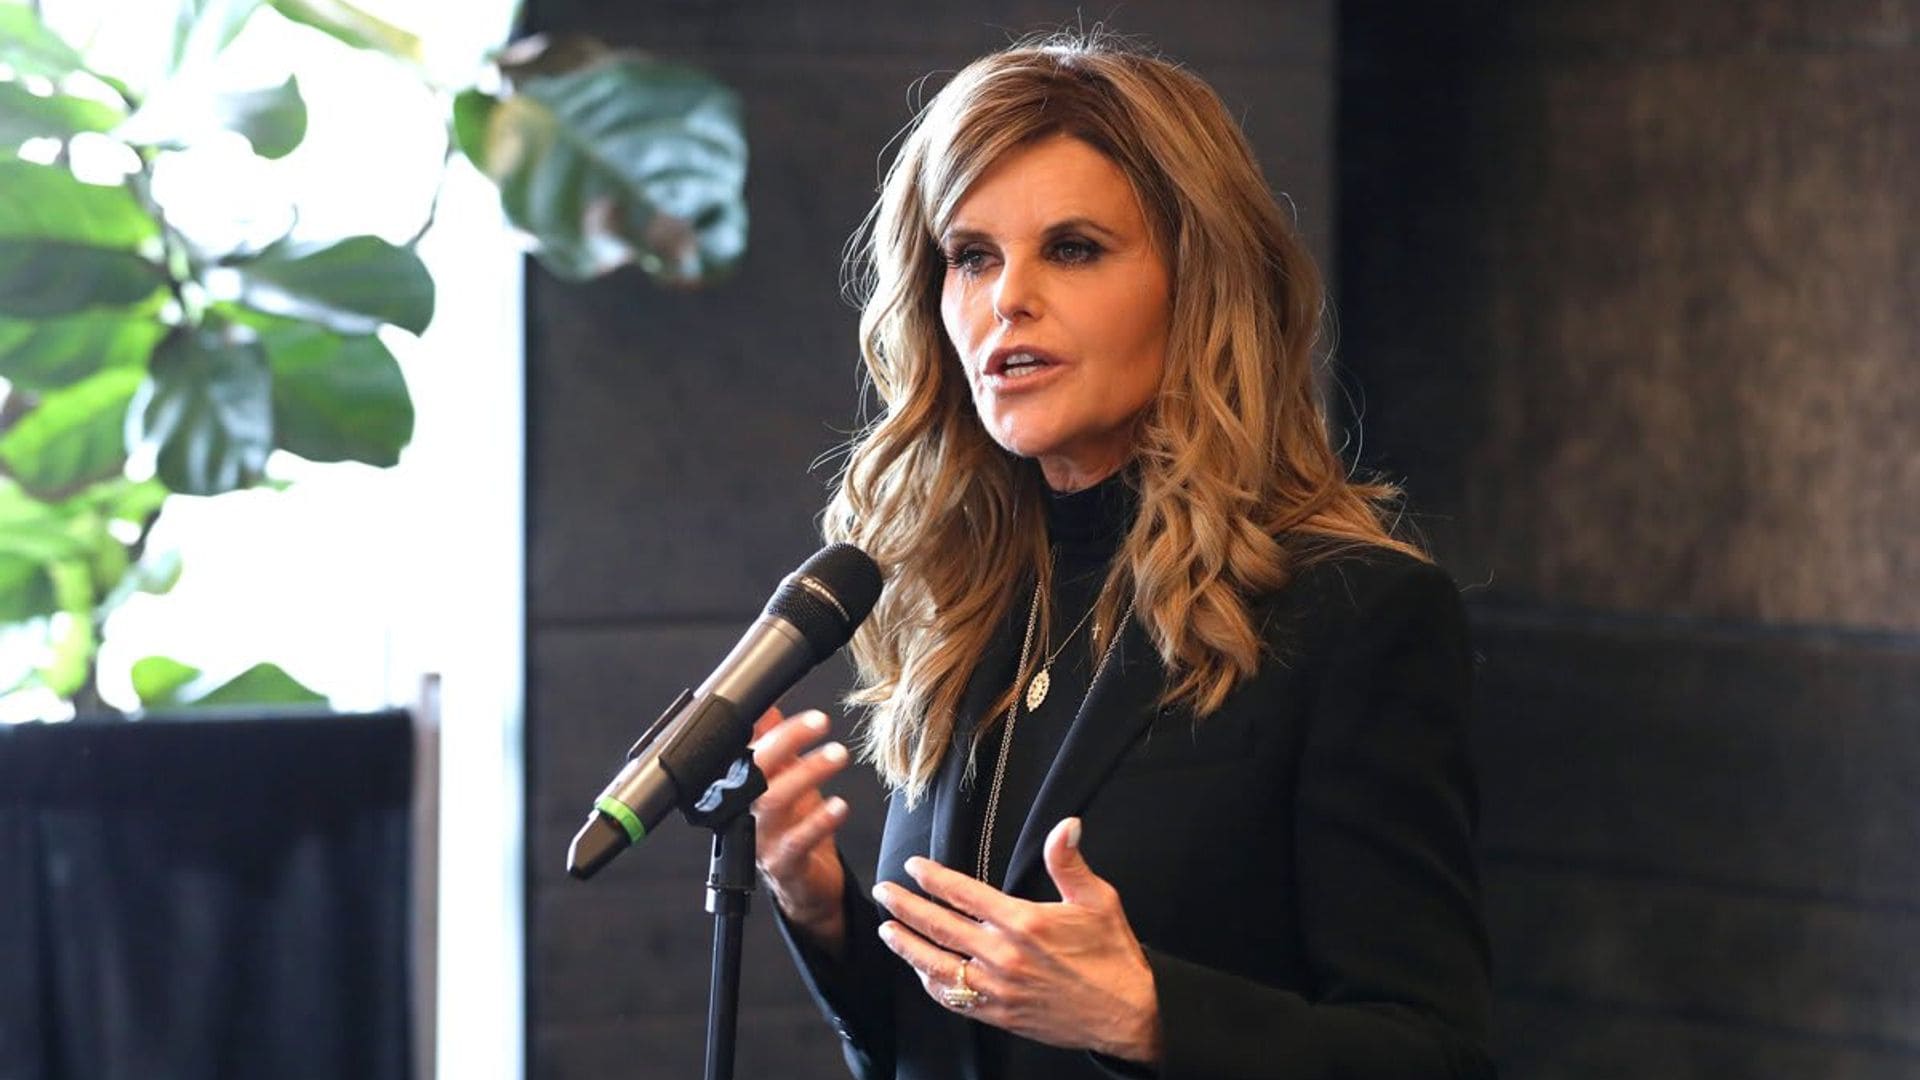 Maria Shriver And The Women's Alzheimer's Movement Announce The Recipients Of The 2019 Research Grants